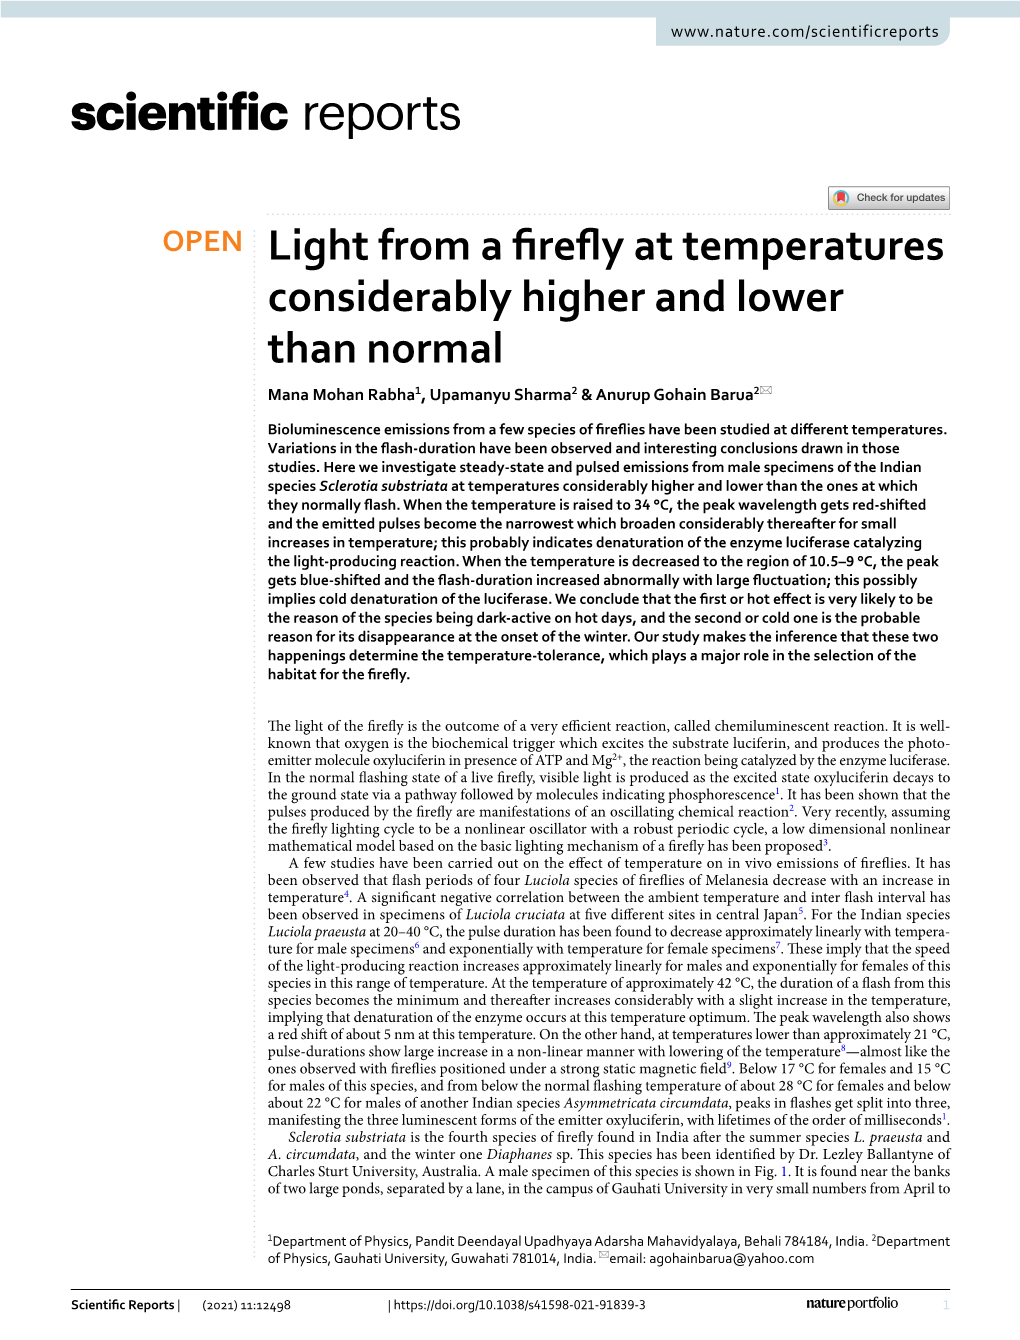 Light from a Firefly at Temperatures Considerably Higher and Lower Than Normal